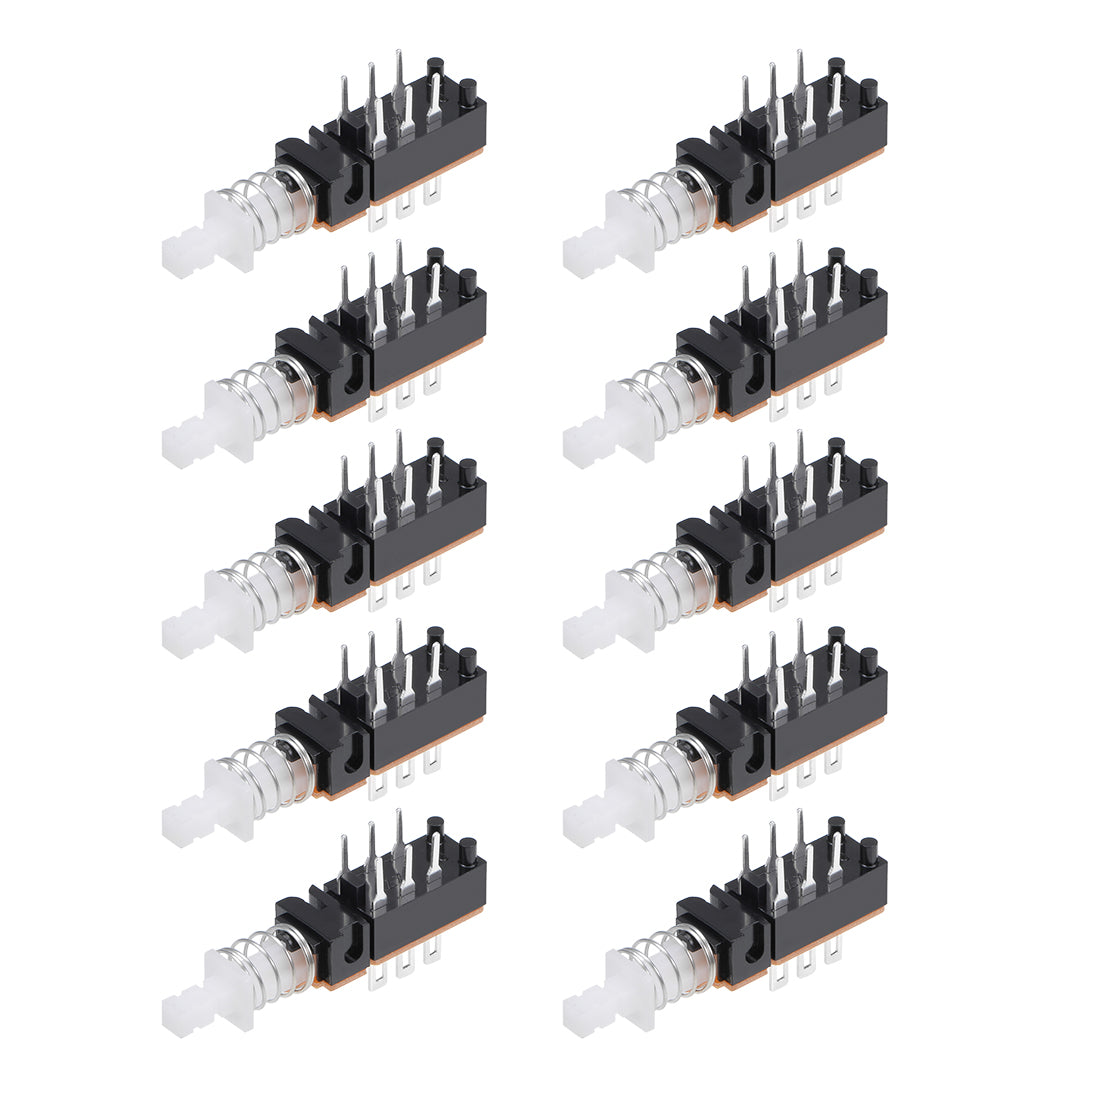 uxcell Uxcell Push Button Switch, DPDT 6 Pin 1 Position Self-Locking Black 10pcs